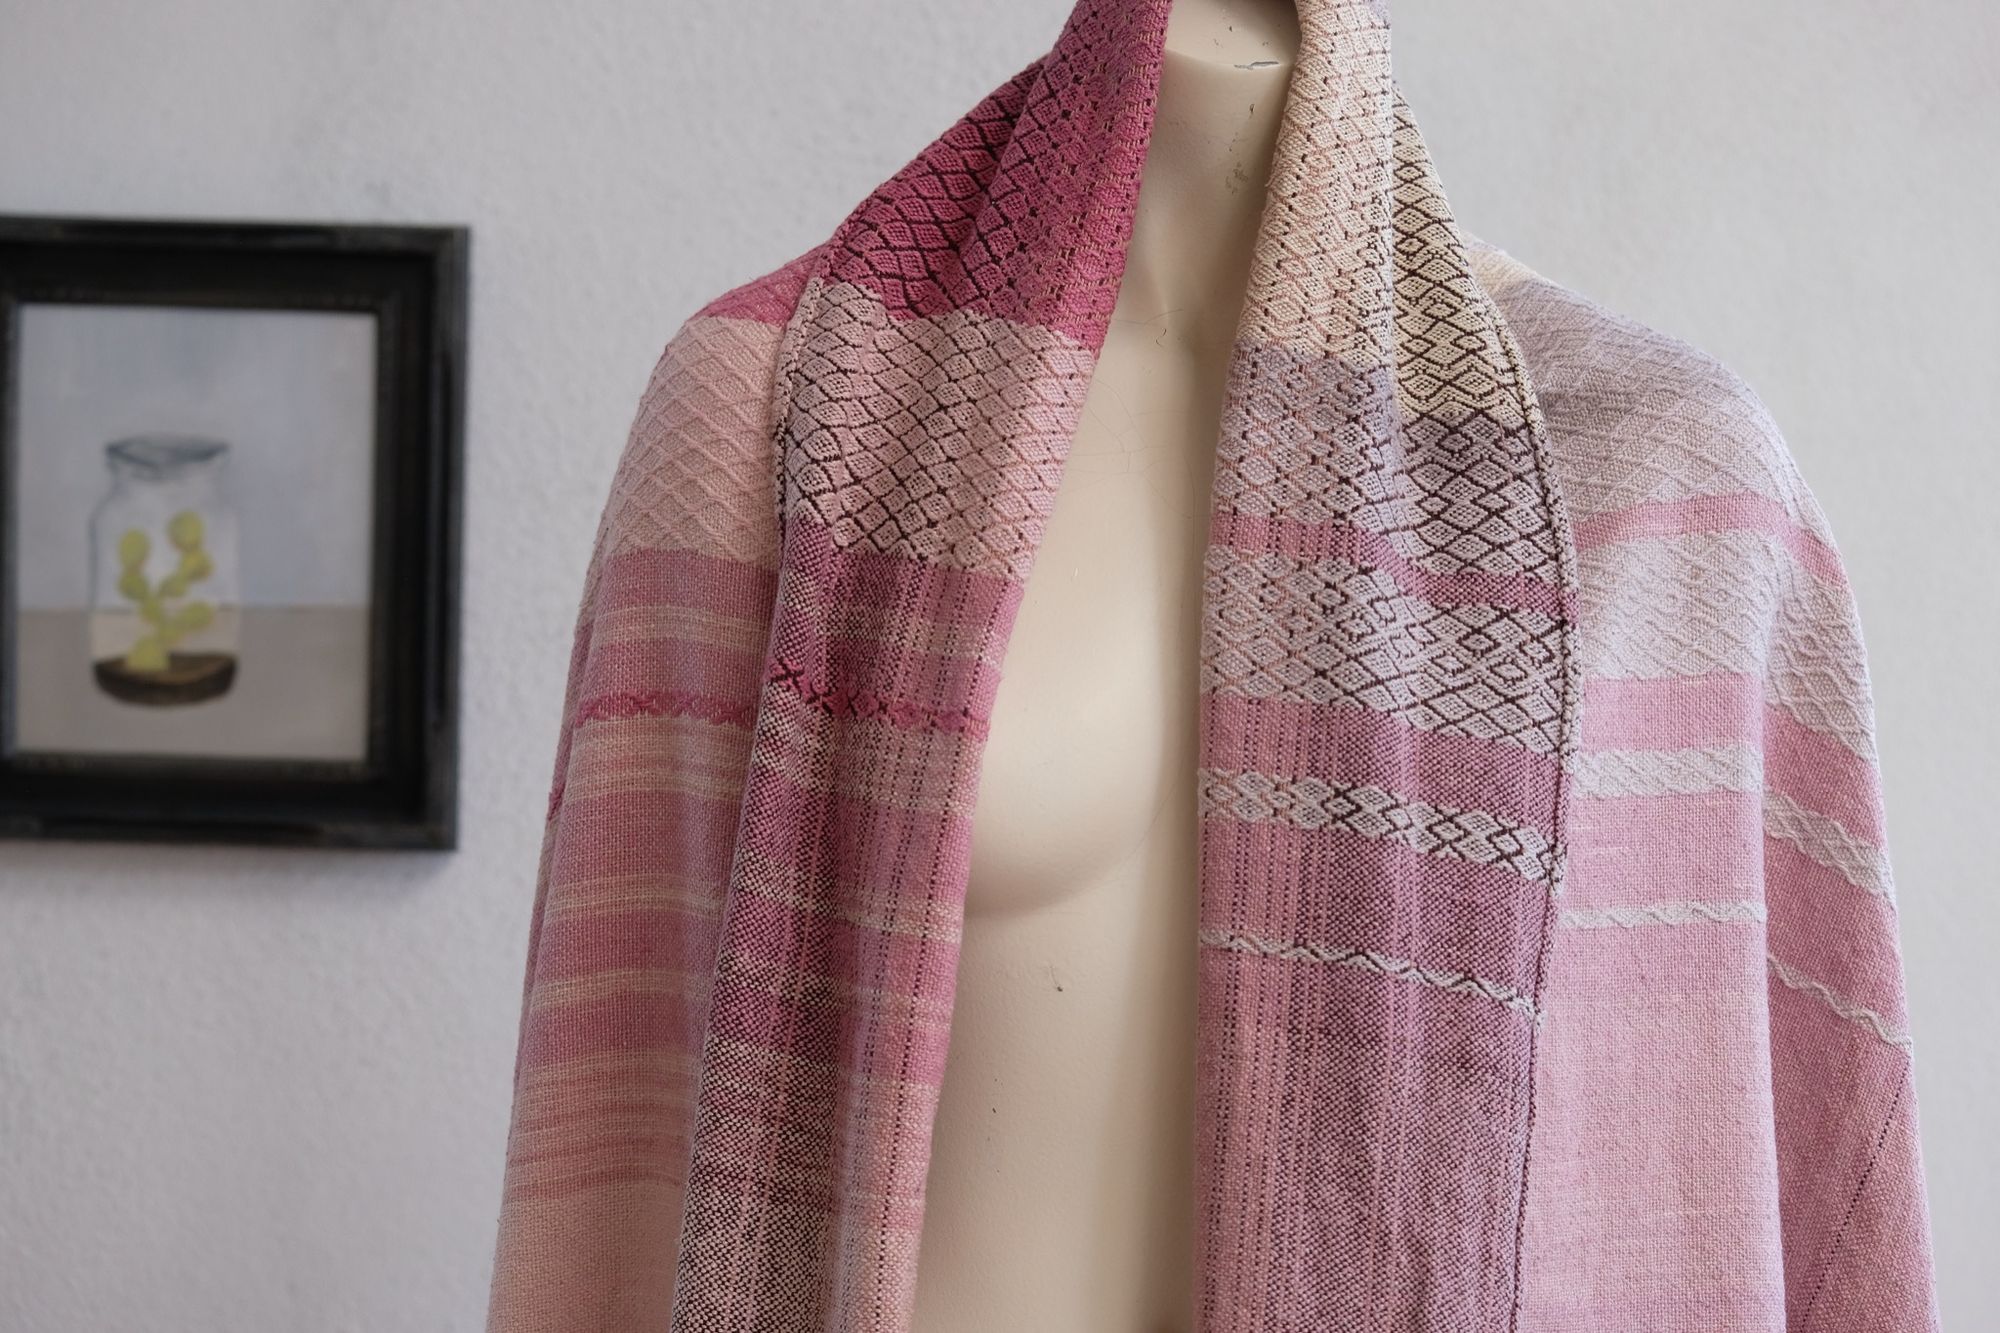 Handwoven fabric rests on a mannequin in a gallery. The fabric is naturally dyed with cochineal in all shades of pink and fuchsia